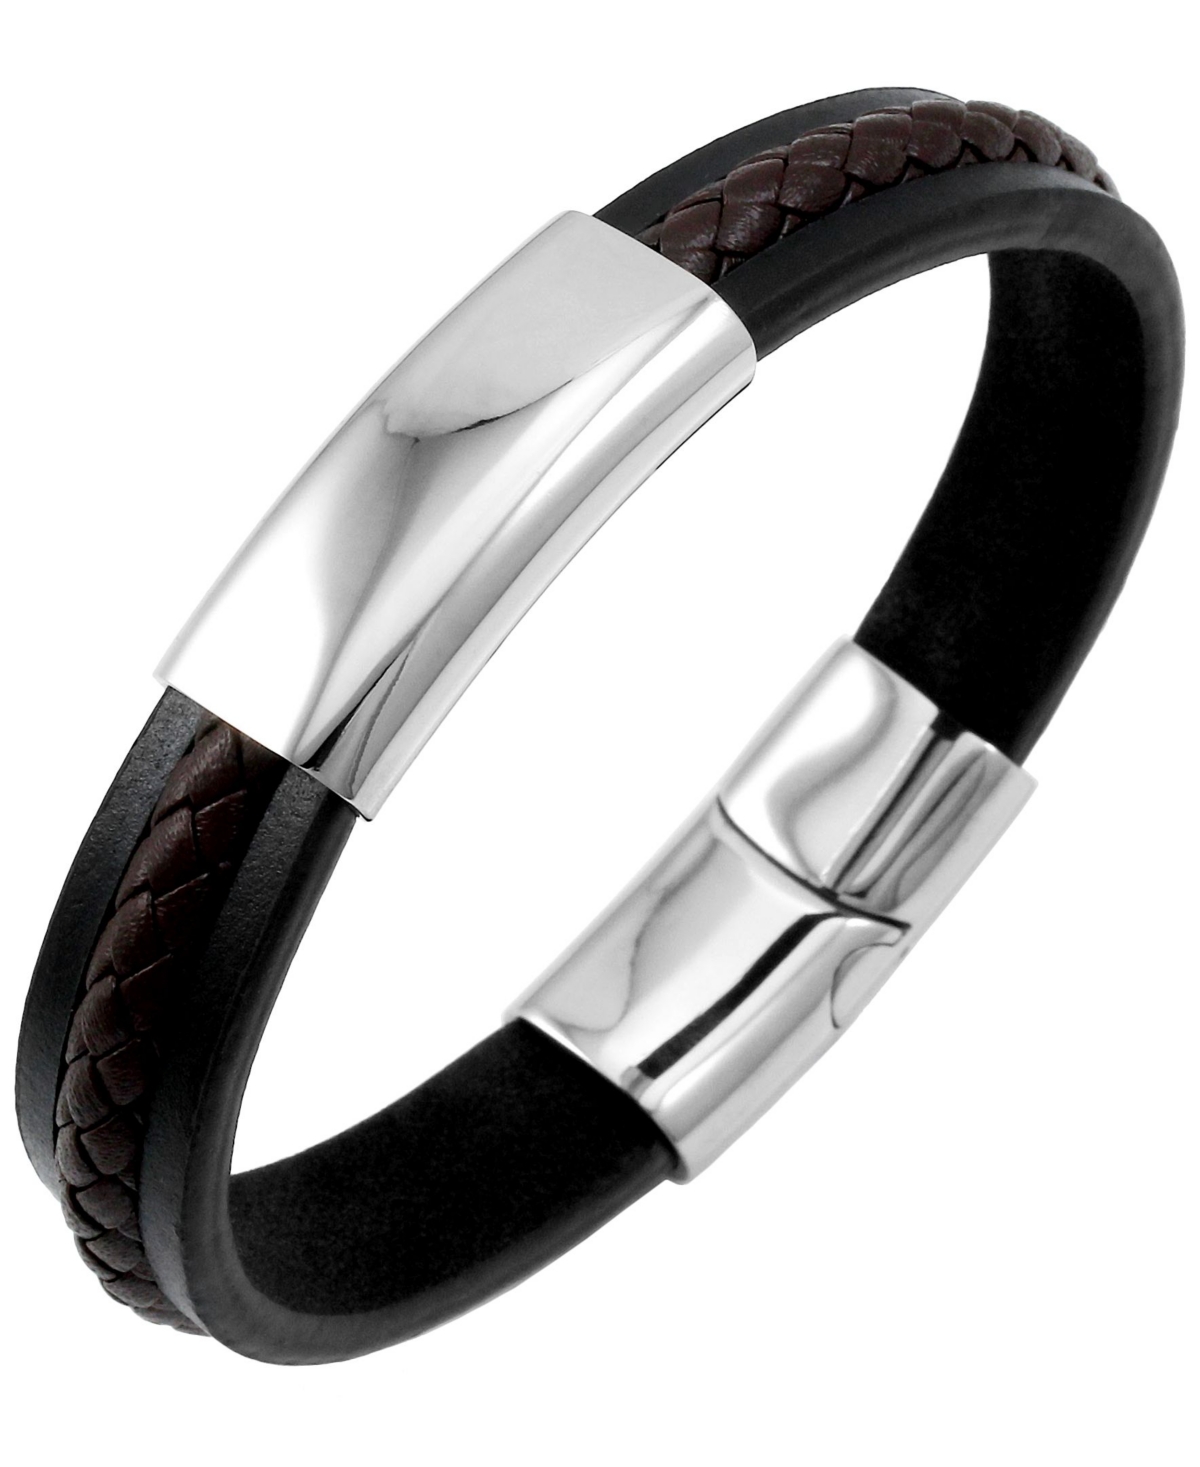 Sutton Stainless Steel Two-Tone Leather Bracelet With Braided Stripe Detail - Black